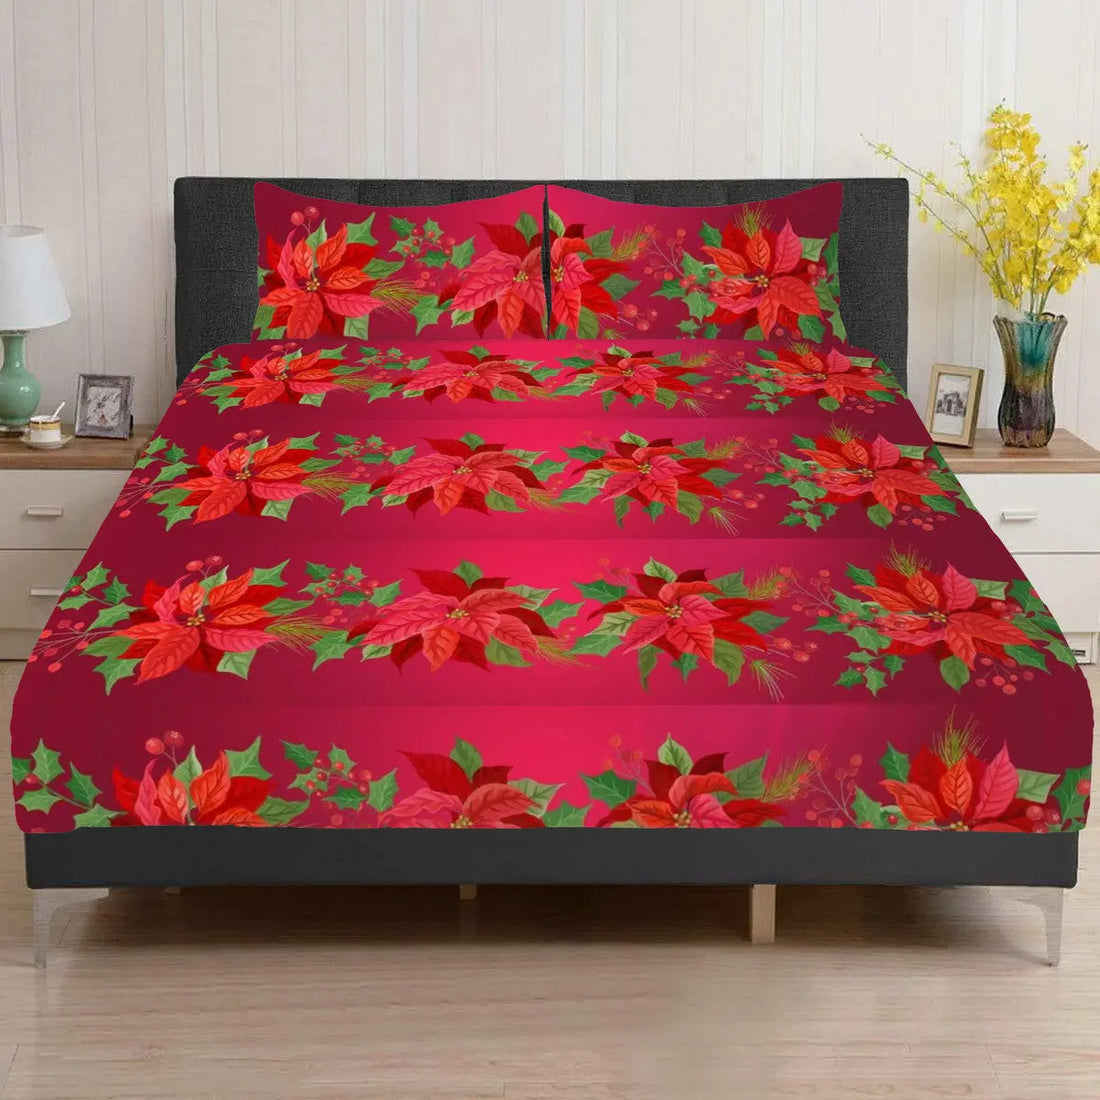 Poinsettia Bedding Christmas Home-clothes-jewelry